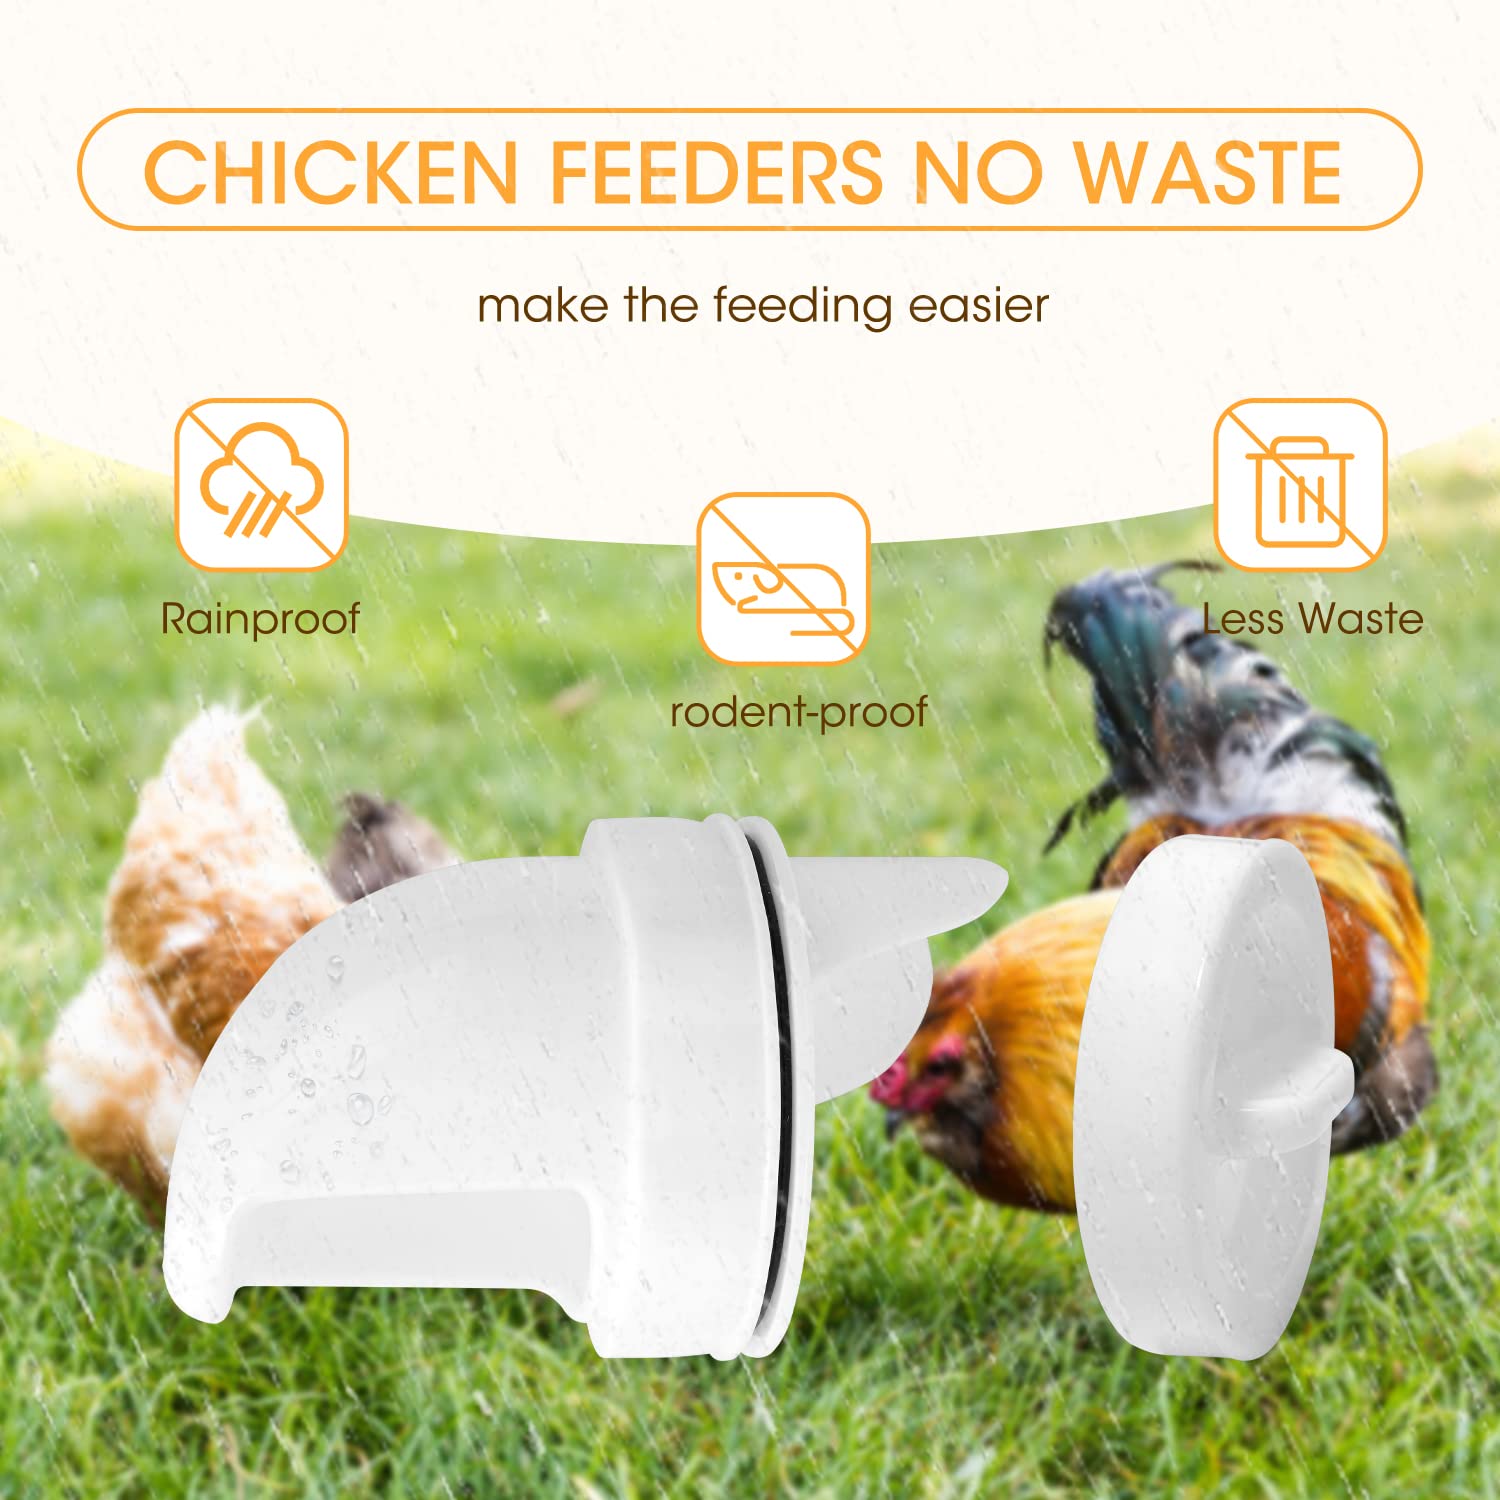 Chicken Feeder, Automatic Chicken Feeder and Waterer Set No Waste Rain Proof DIY Poultry Feeder with Rat Stopper Caps Chicken Water Feeder for Buckets, Barrels, Bins, Troughs 4Packs